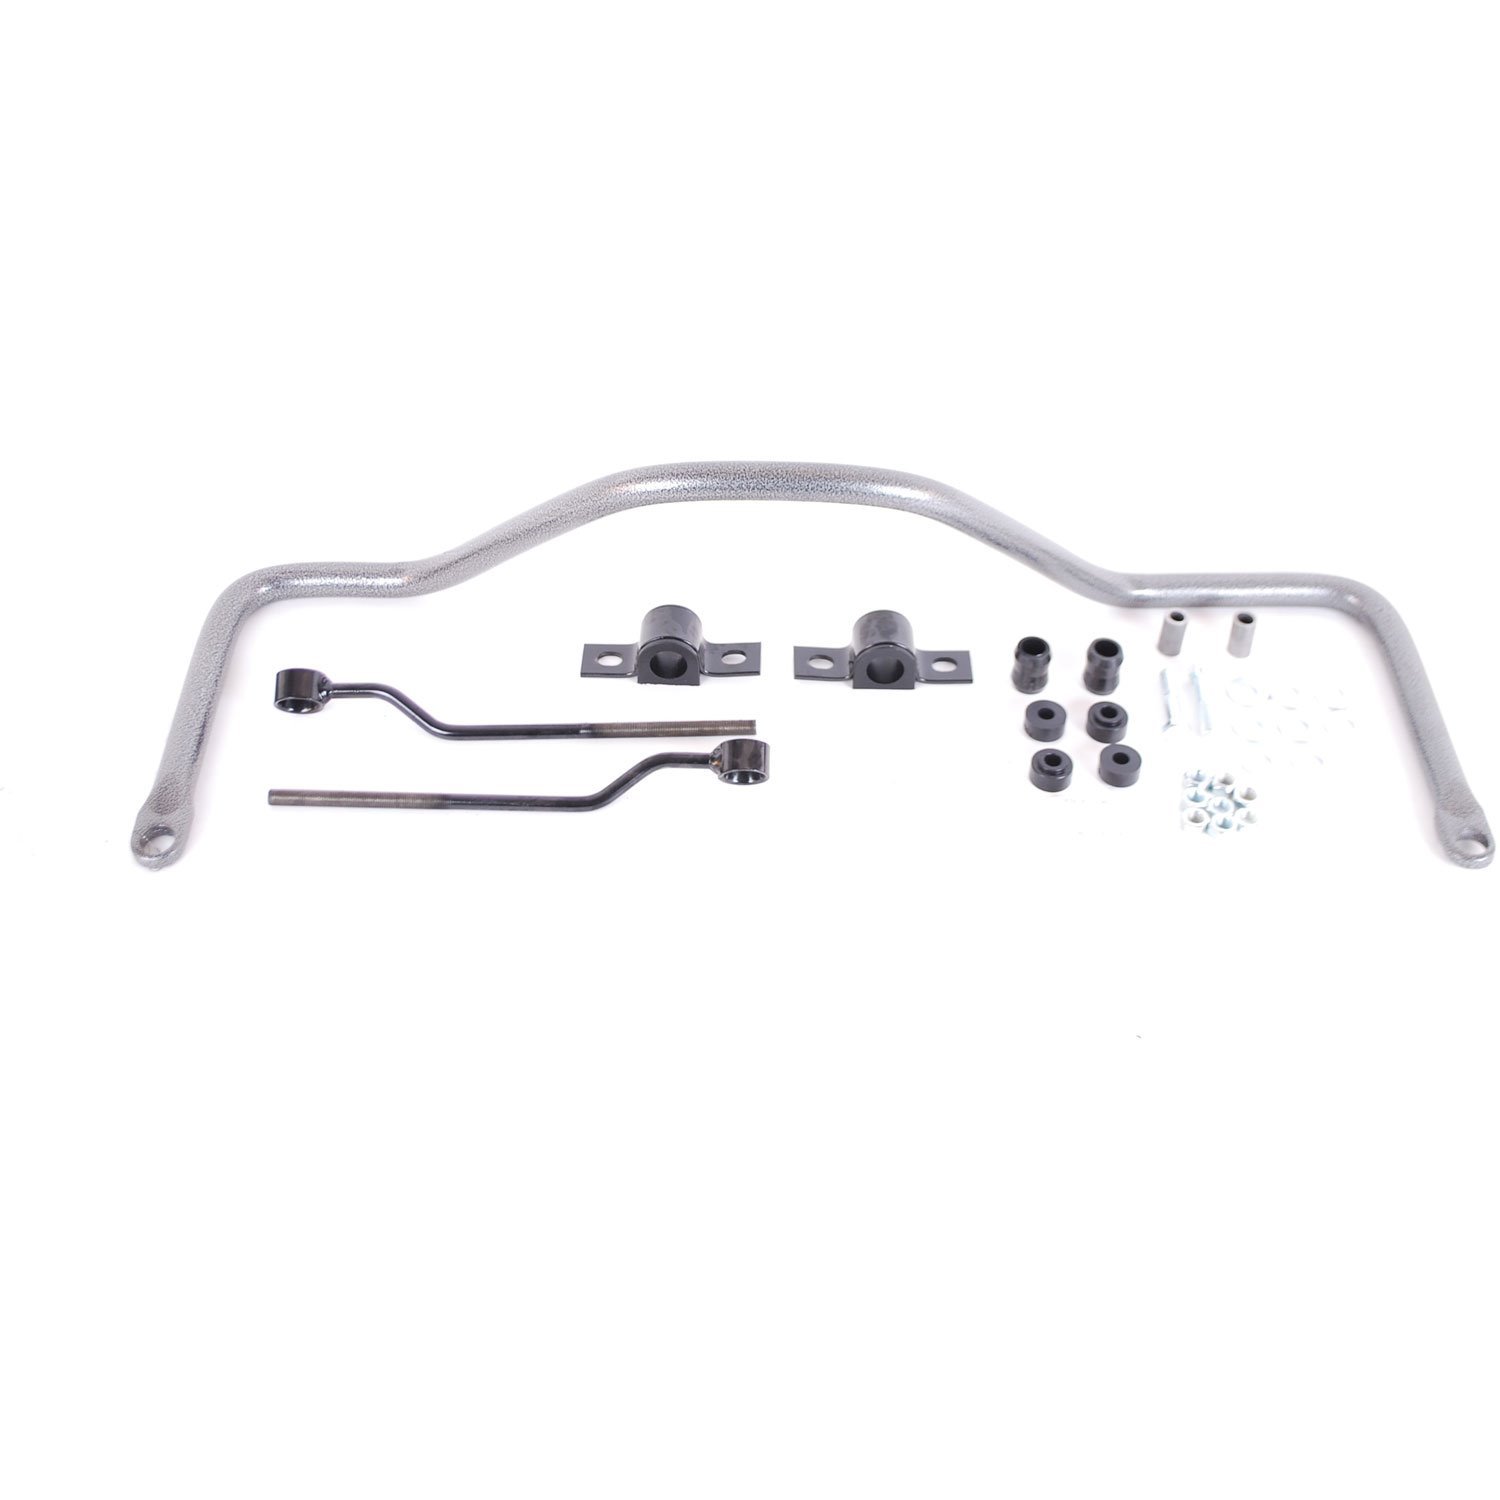 Rear Sway Bar for 1999-2004 Ford F-350 Dually